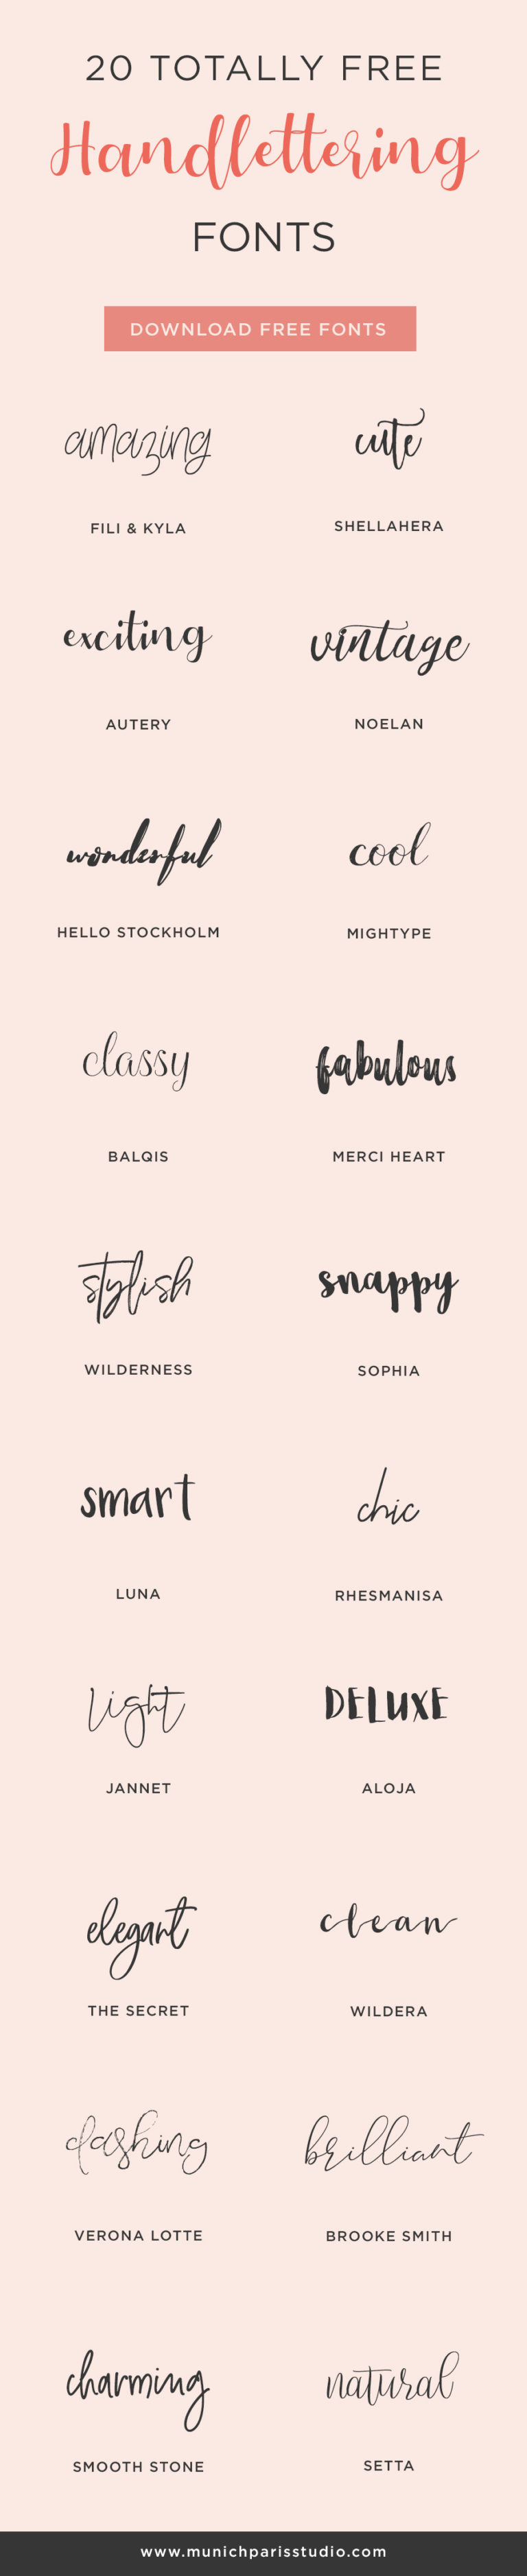 20 FREE Handwriting Fonts for personal and commercial use